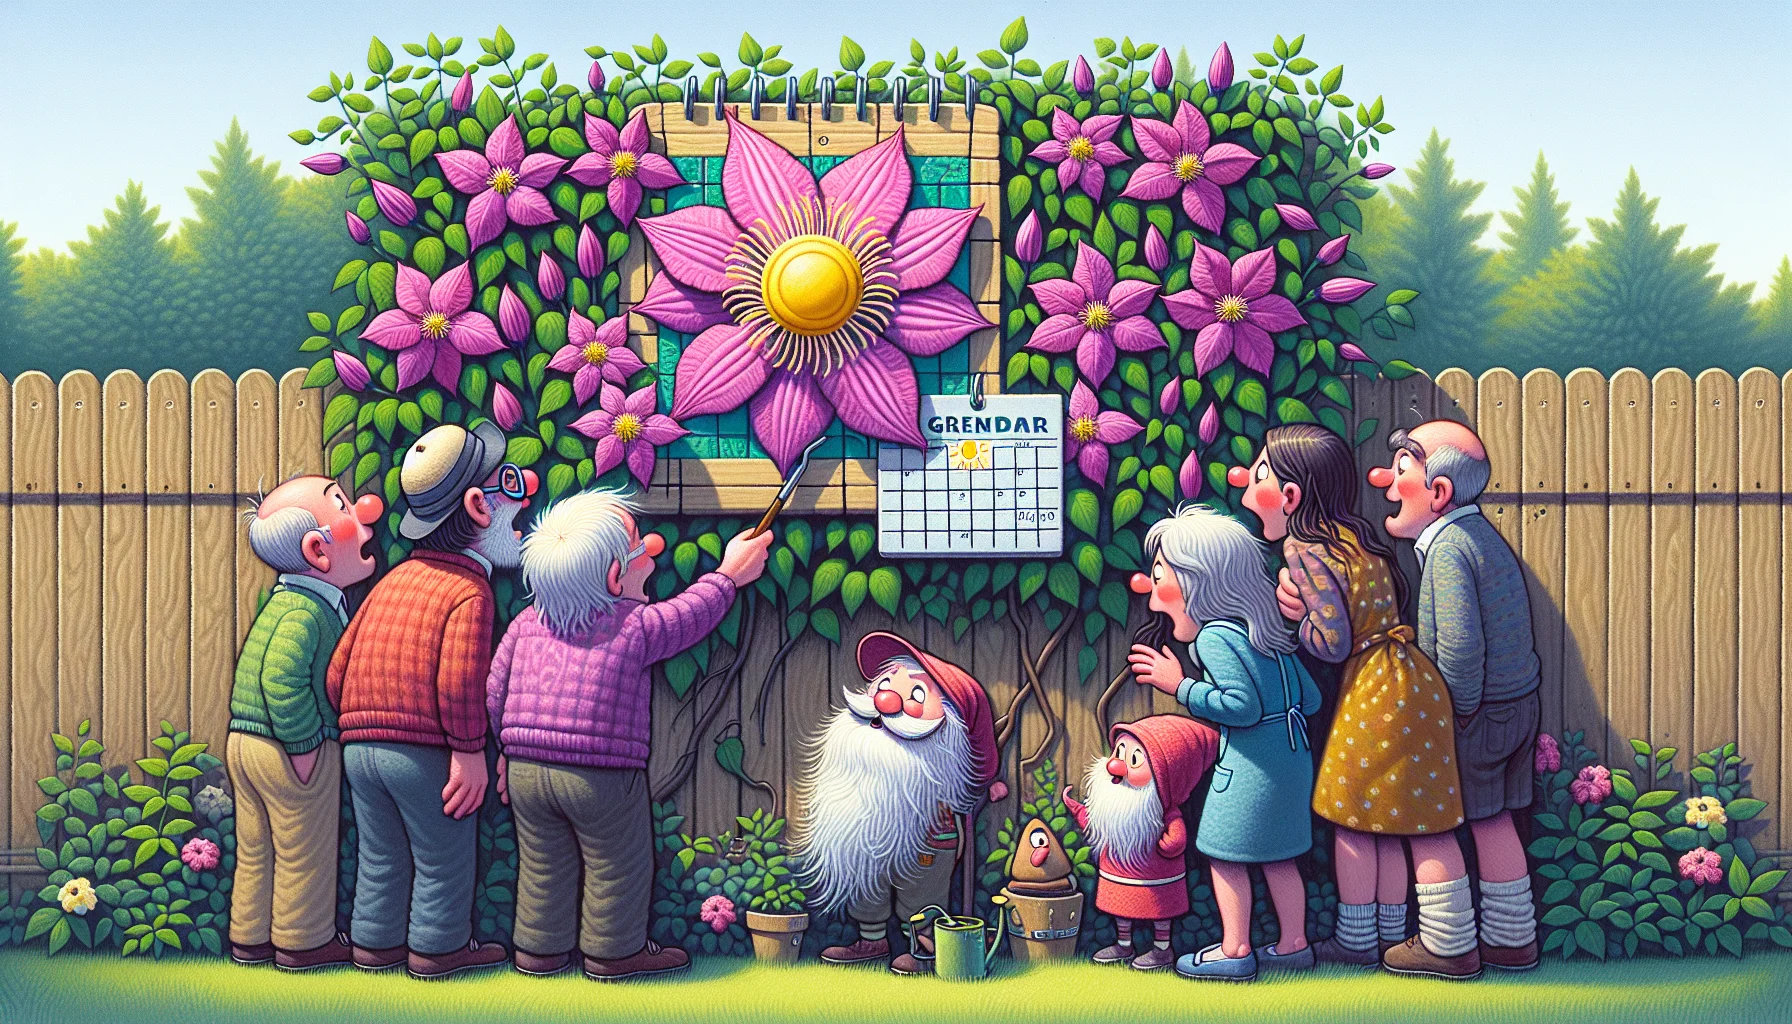 Create a light-hearted scene of a Clymatis garden in full blossom, indicating the peak of their blooming phase. Include a diverse group of individuals of different genders and descents, all looking puzzled as they peek at a colorful, oversized calendar hung on a garden fence. The calendar shows a bright sun icon against the current date. Perhaps nearby, a playful garden gnome is pointing towards the calendar with a cheerful grin on its face, encouraging the onlookers to take part in the joy of gardening.